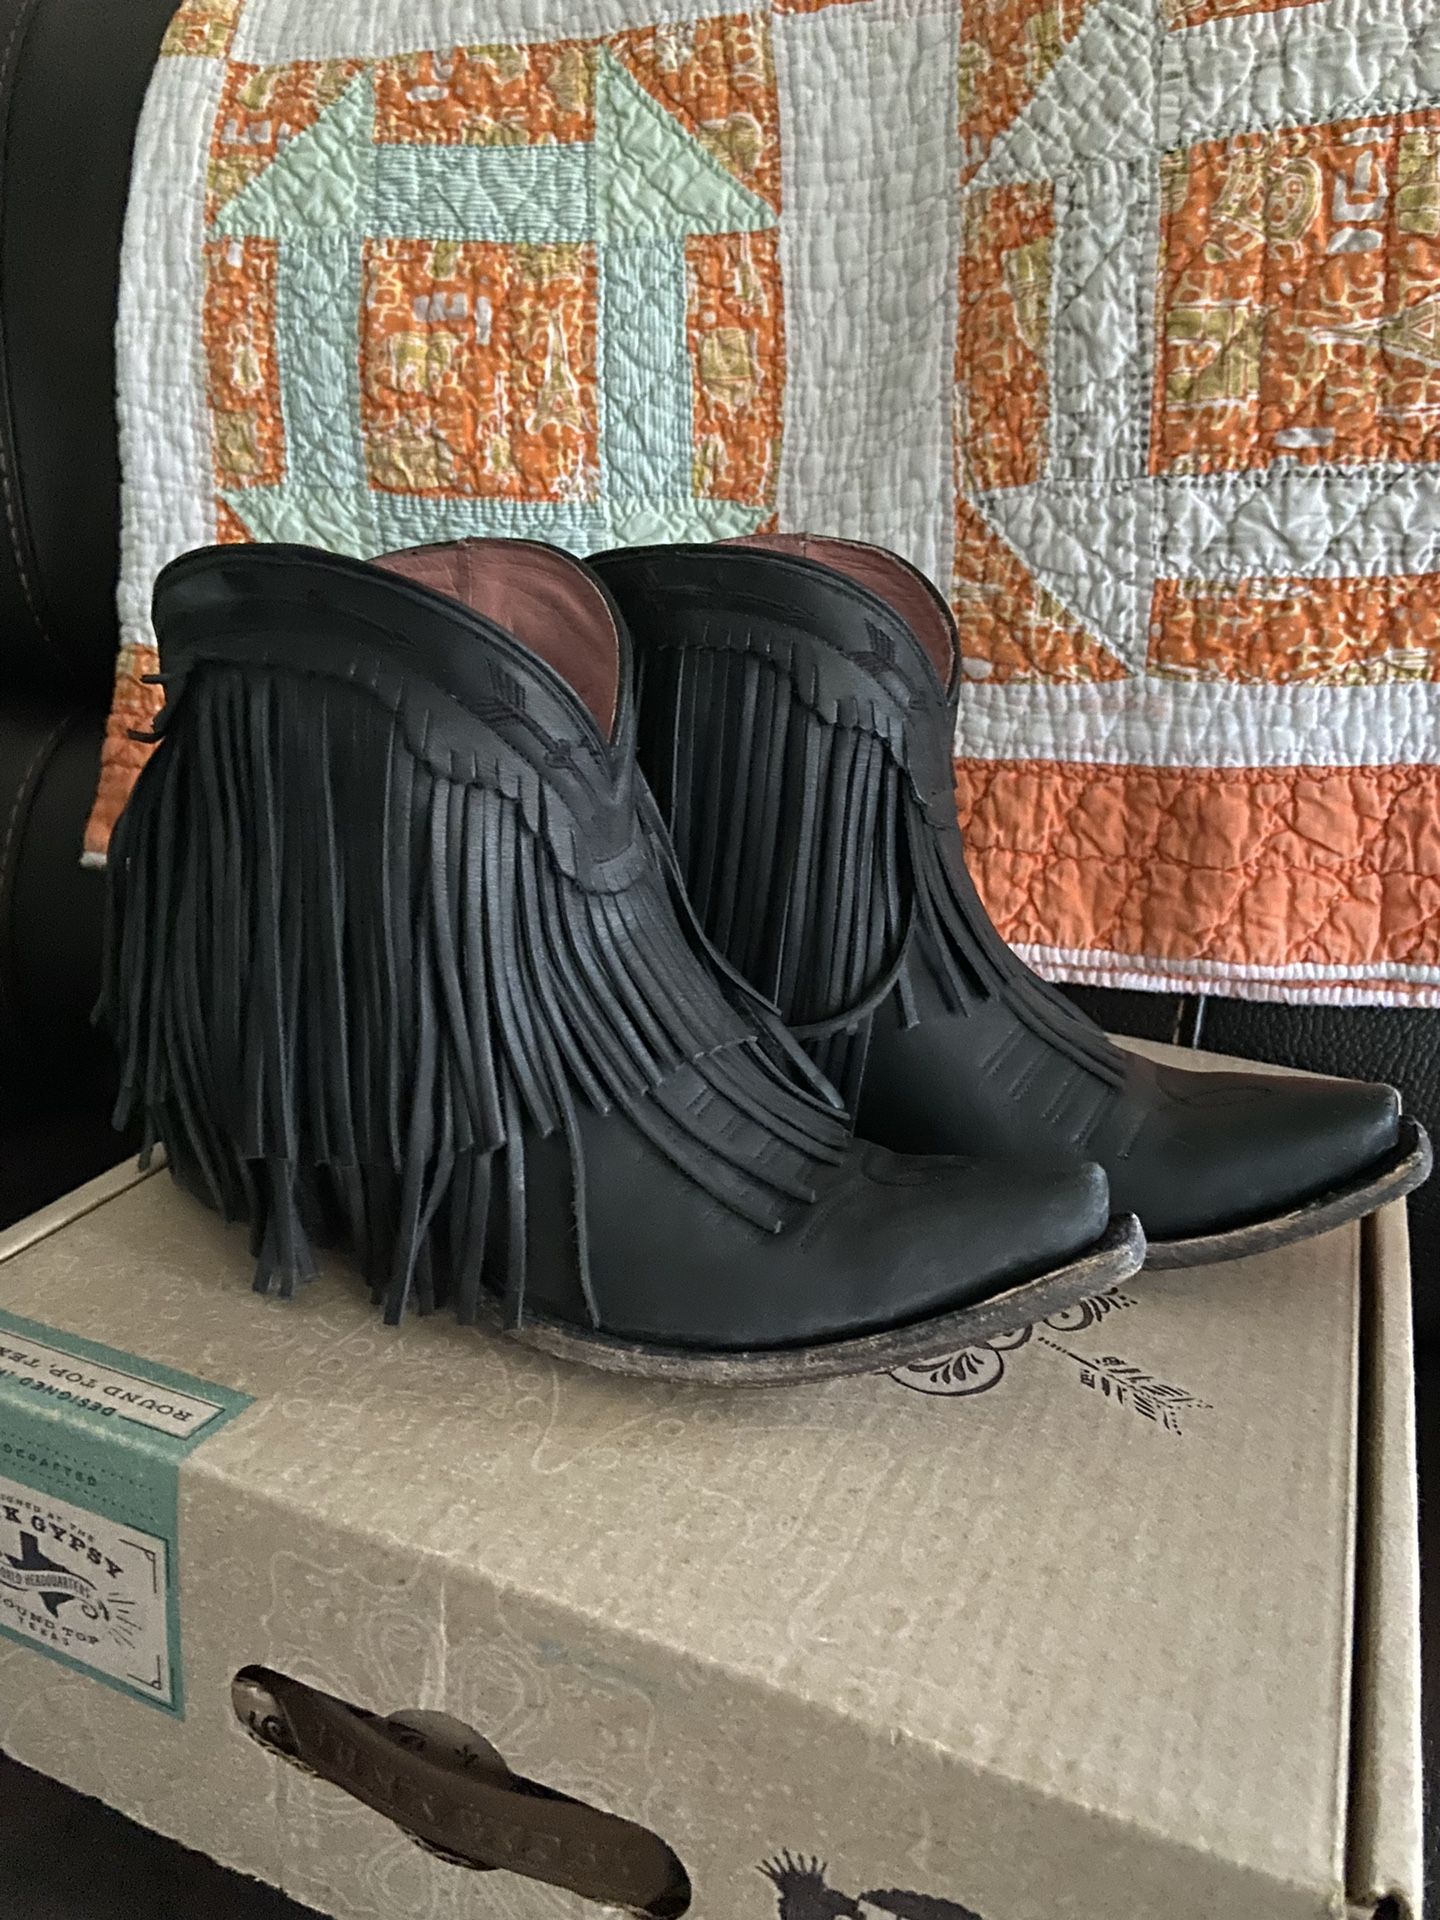 Junk Gypsy Fringed Booties, Size 9 1/2